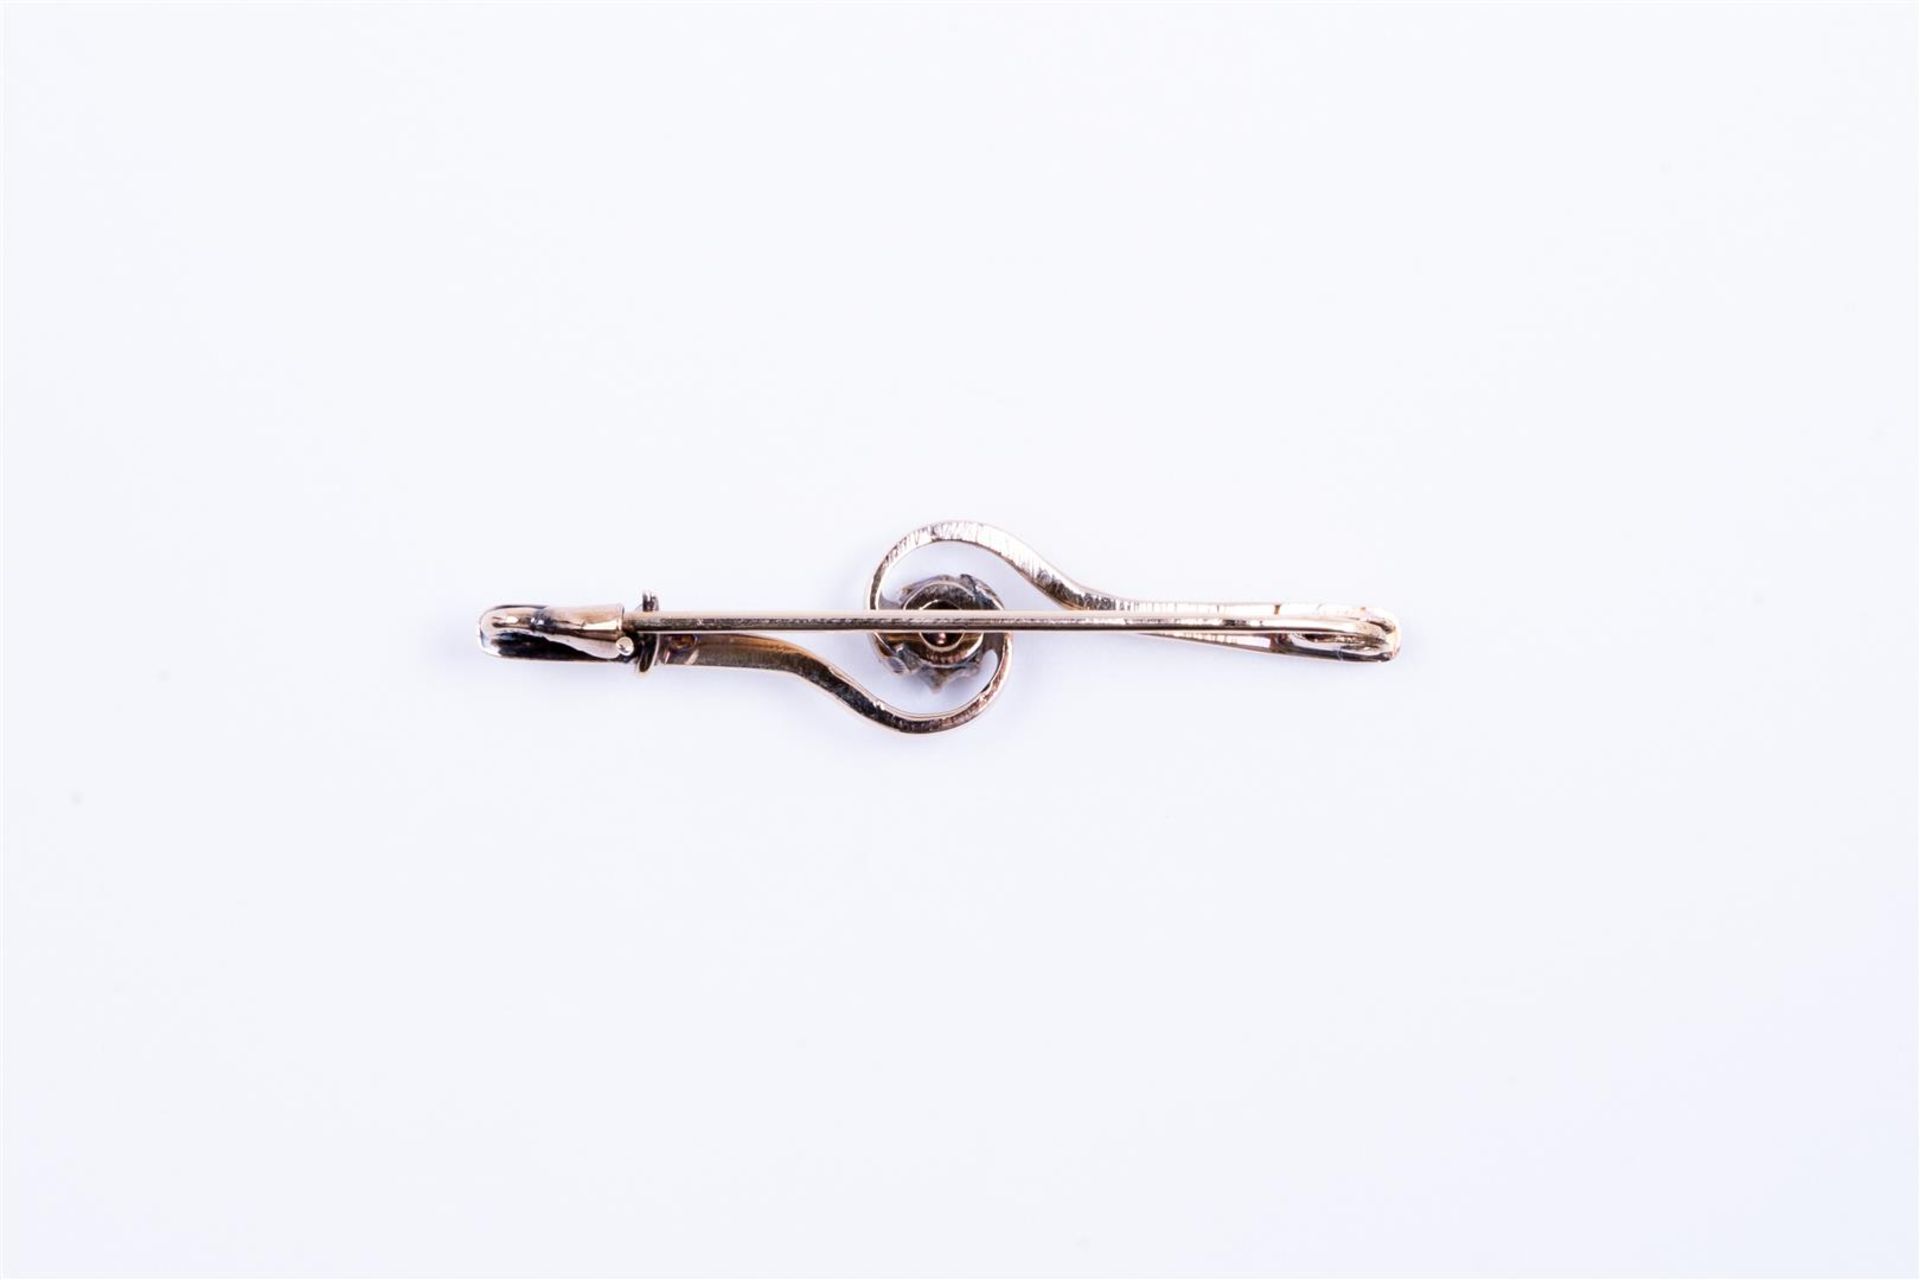 14kt yellow gold pin/brooch set with diamonds.
The brooch/pin is set with 1 rose cut diamond of 0.15 - Image 3 of 3